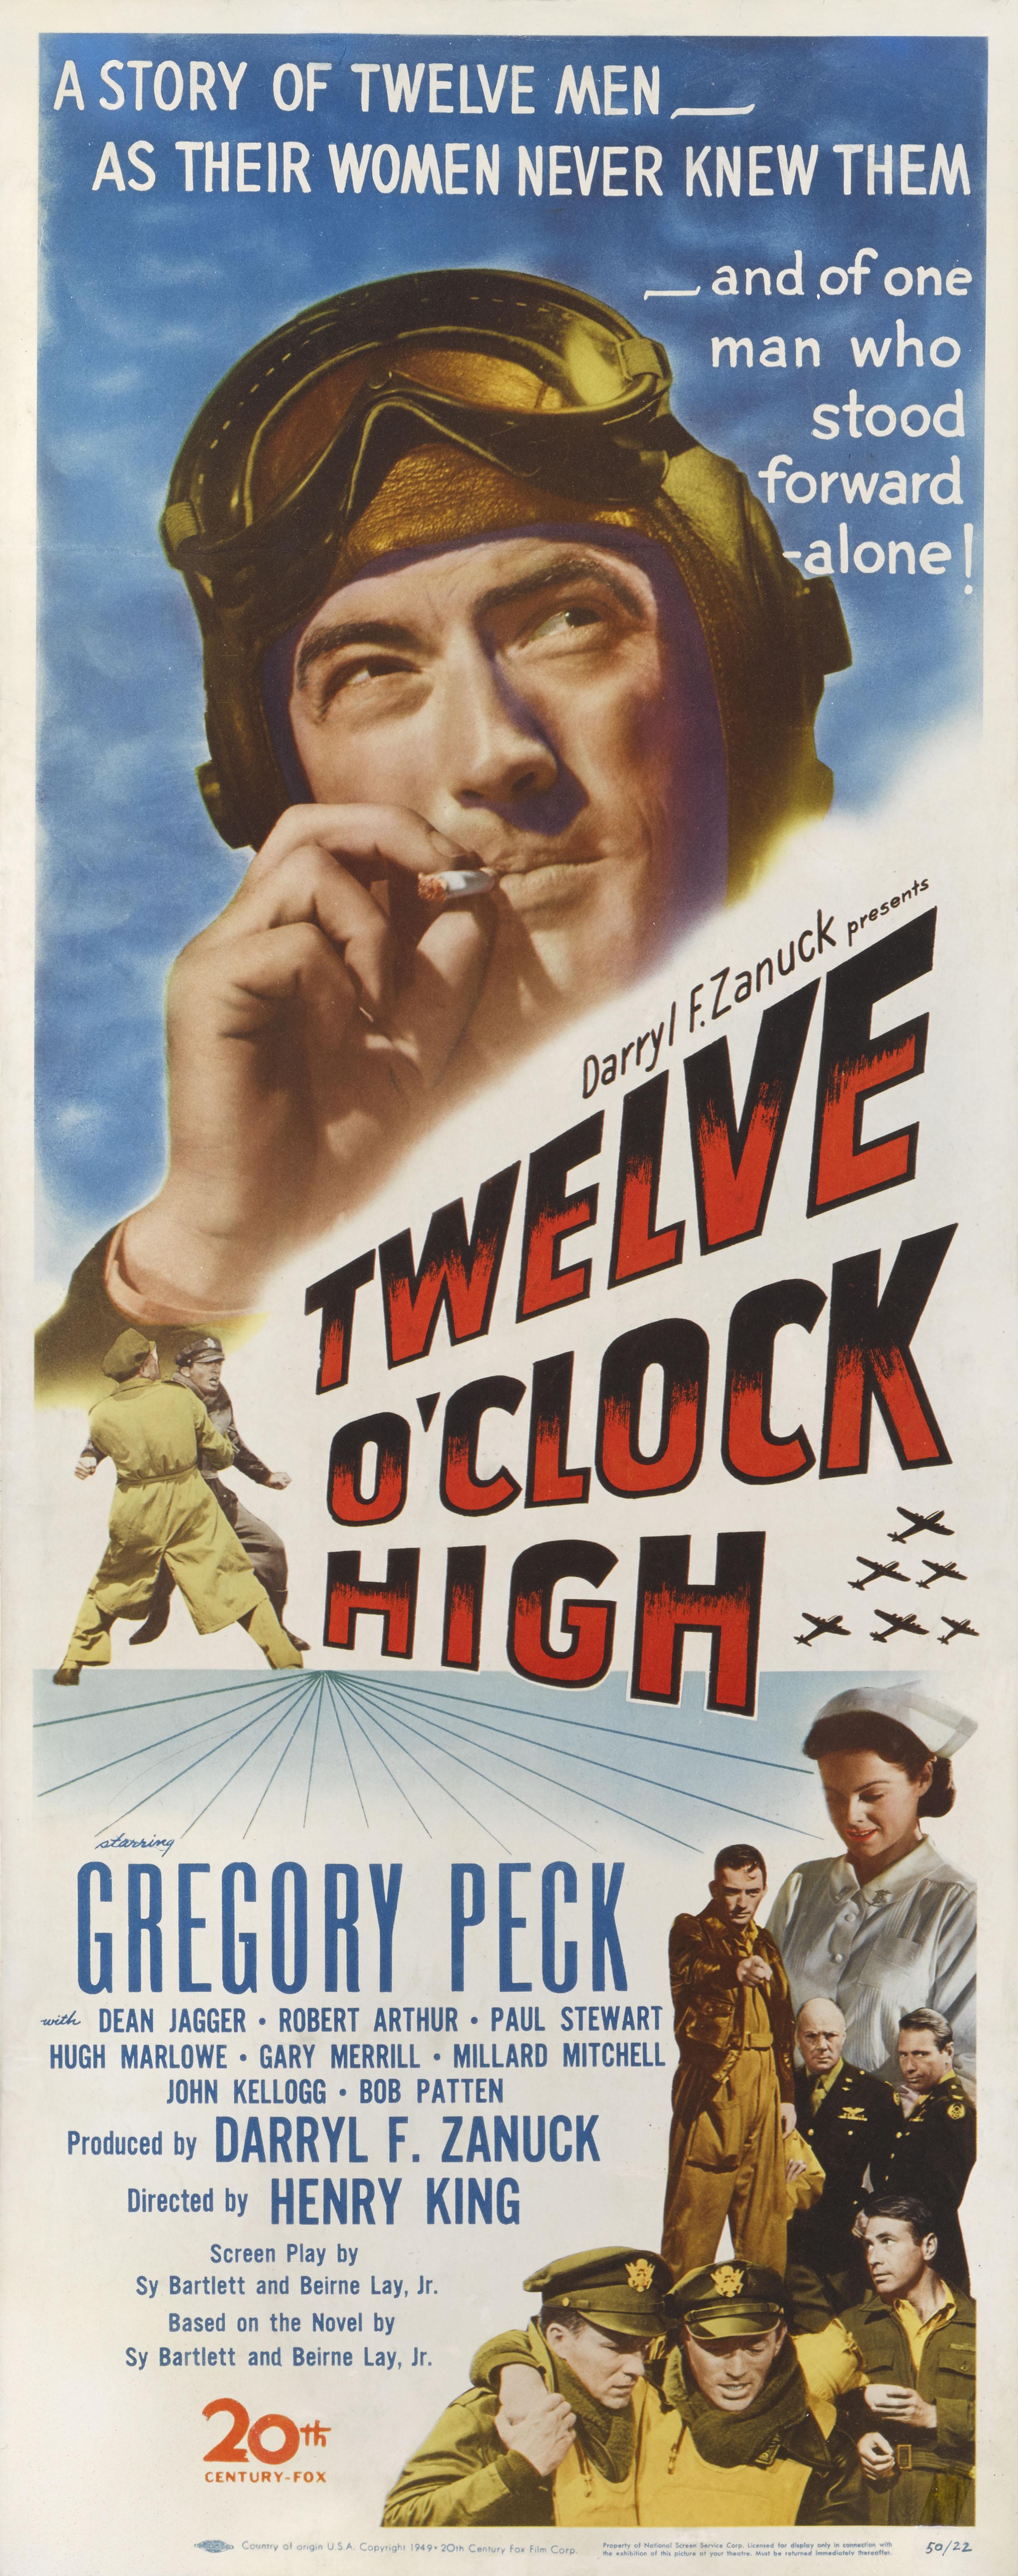 Original US film poster for the 1949 film Twelve O'Clock High. This American war film was adapted from the 1948 novel of the same name by Sy Bartlett and Beirne Lay, Jr. The screenplay was written by Bartlett, Lay and Henry King (uncredited). King